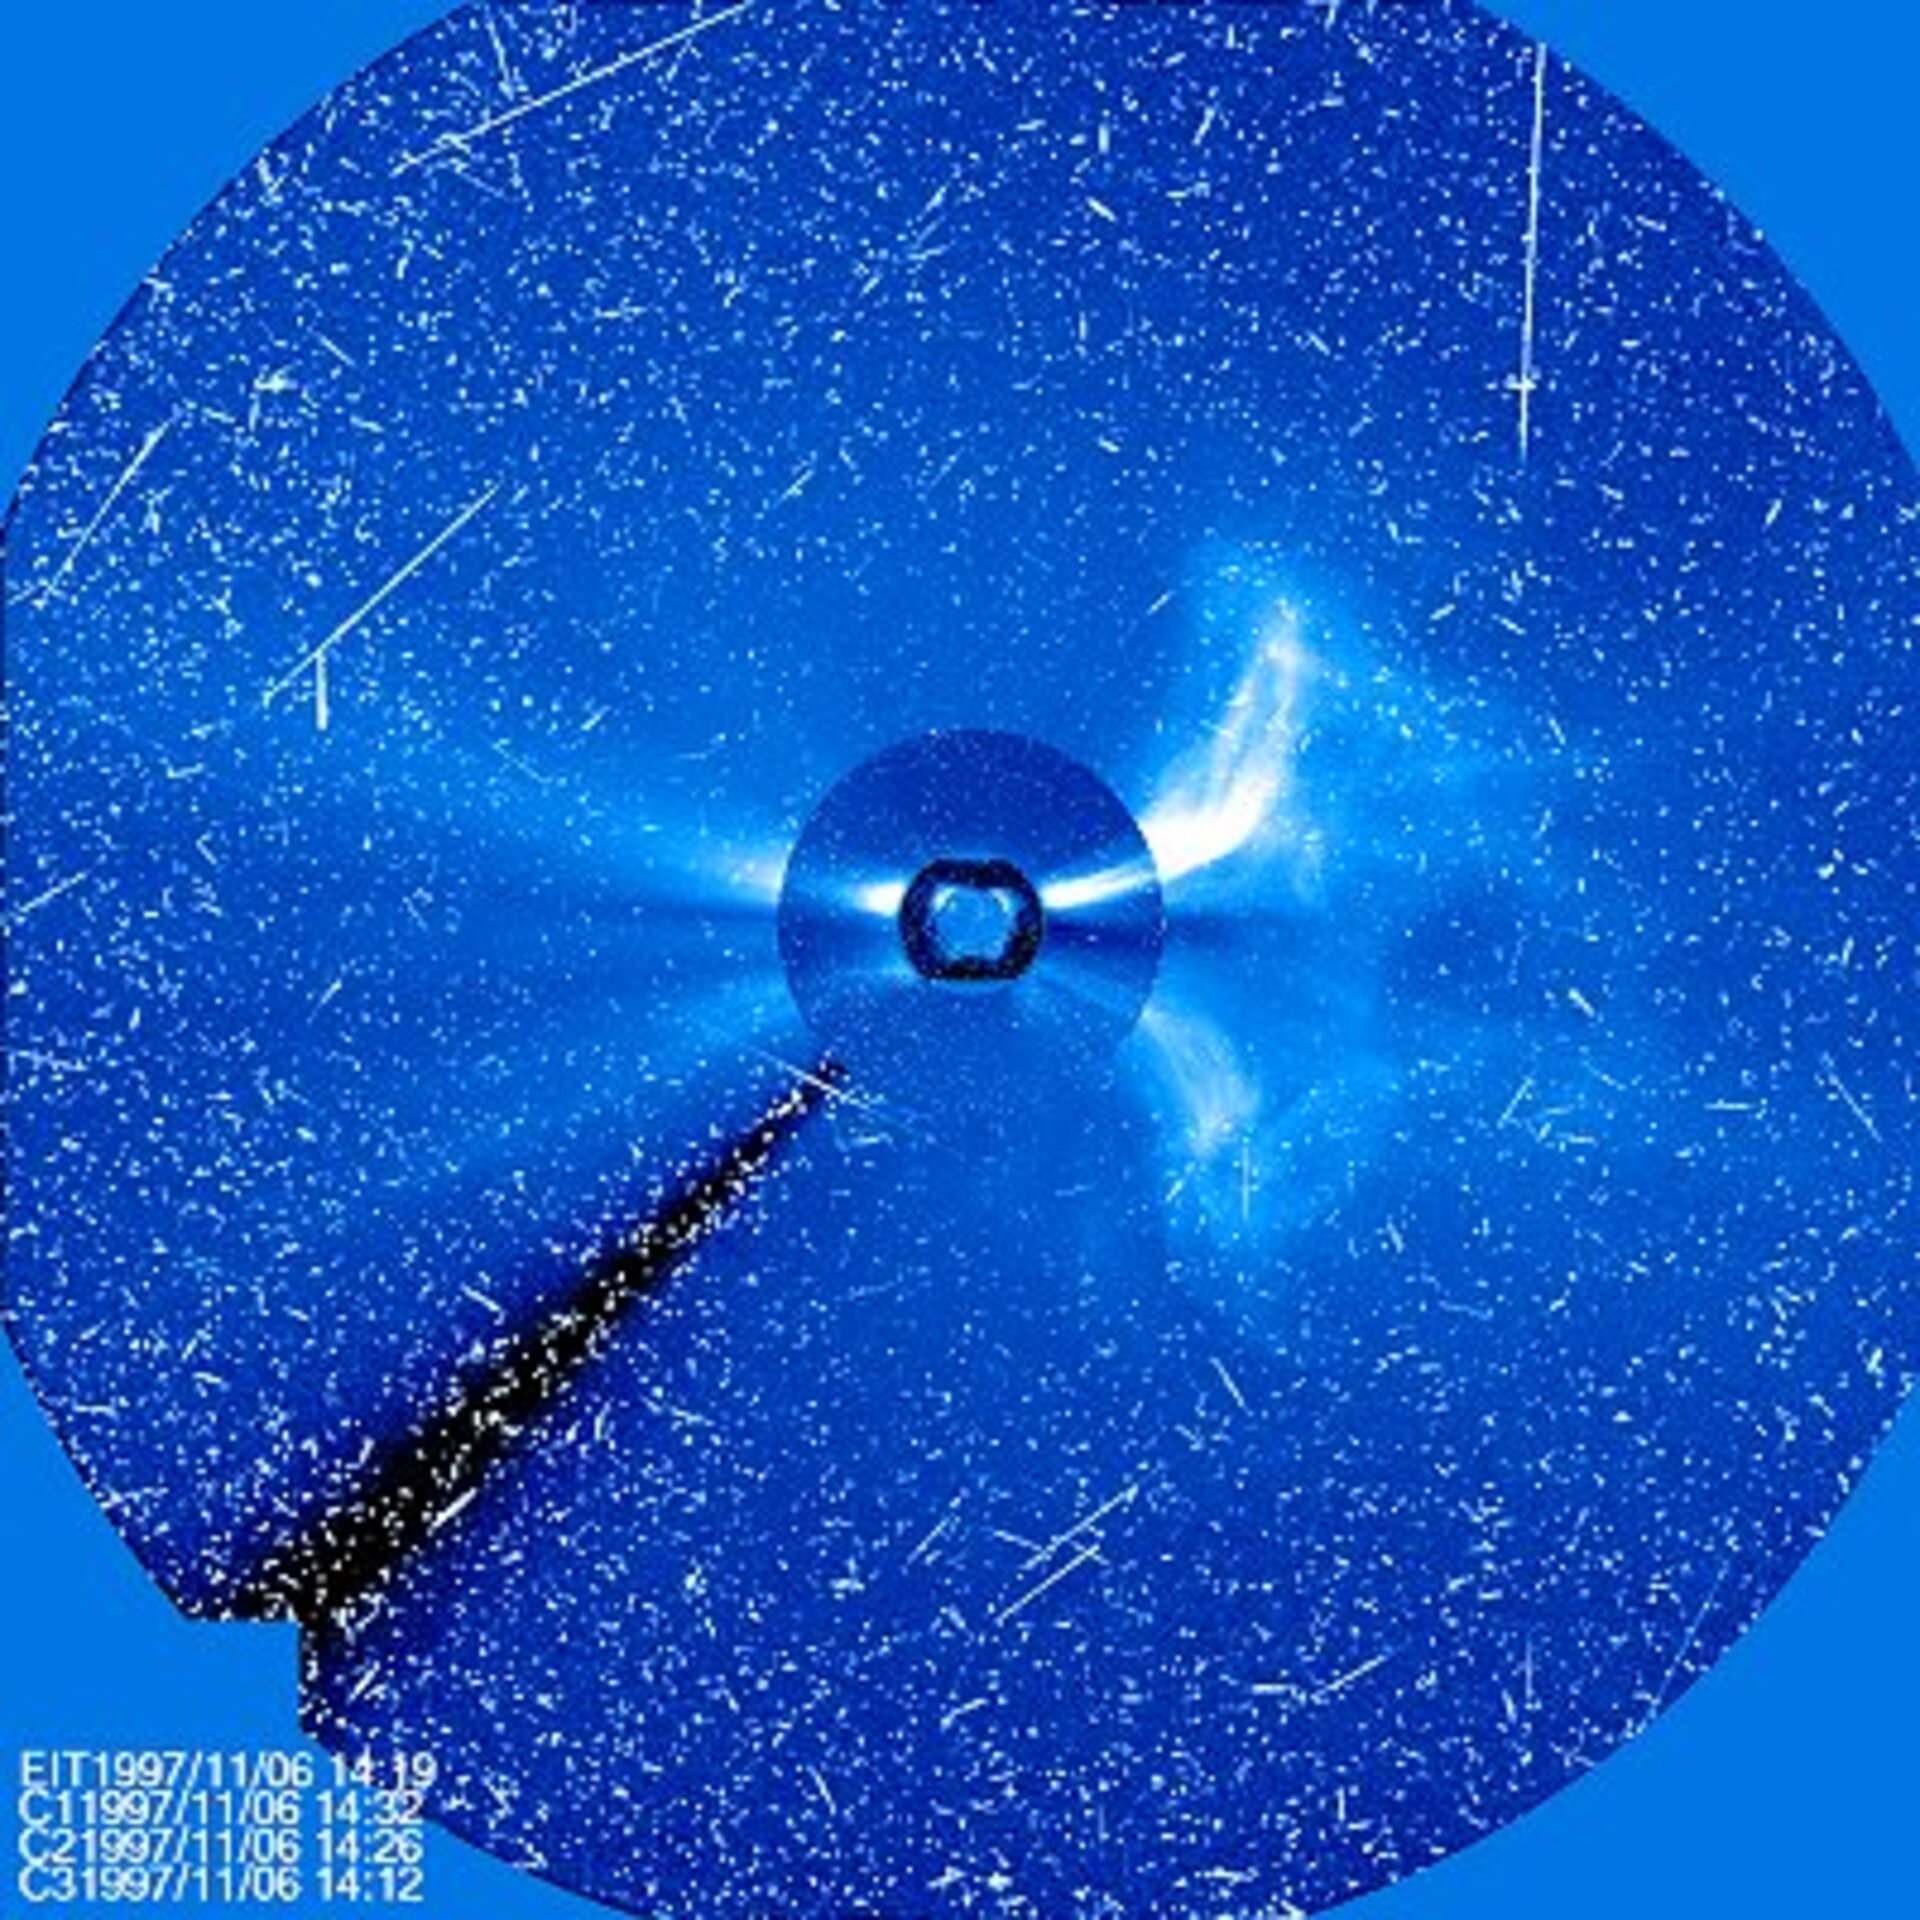 High-energy particles image taken by SOHO